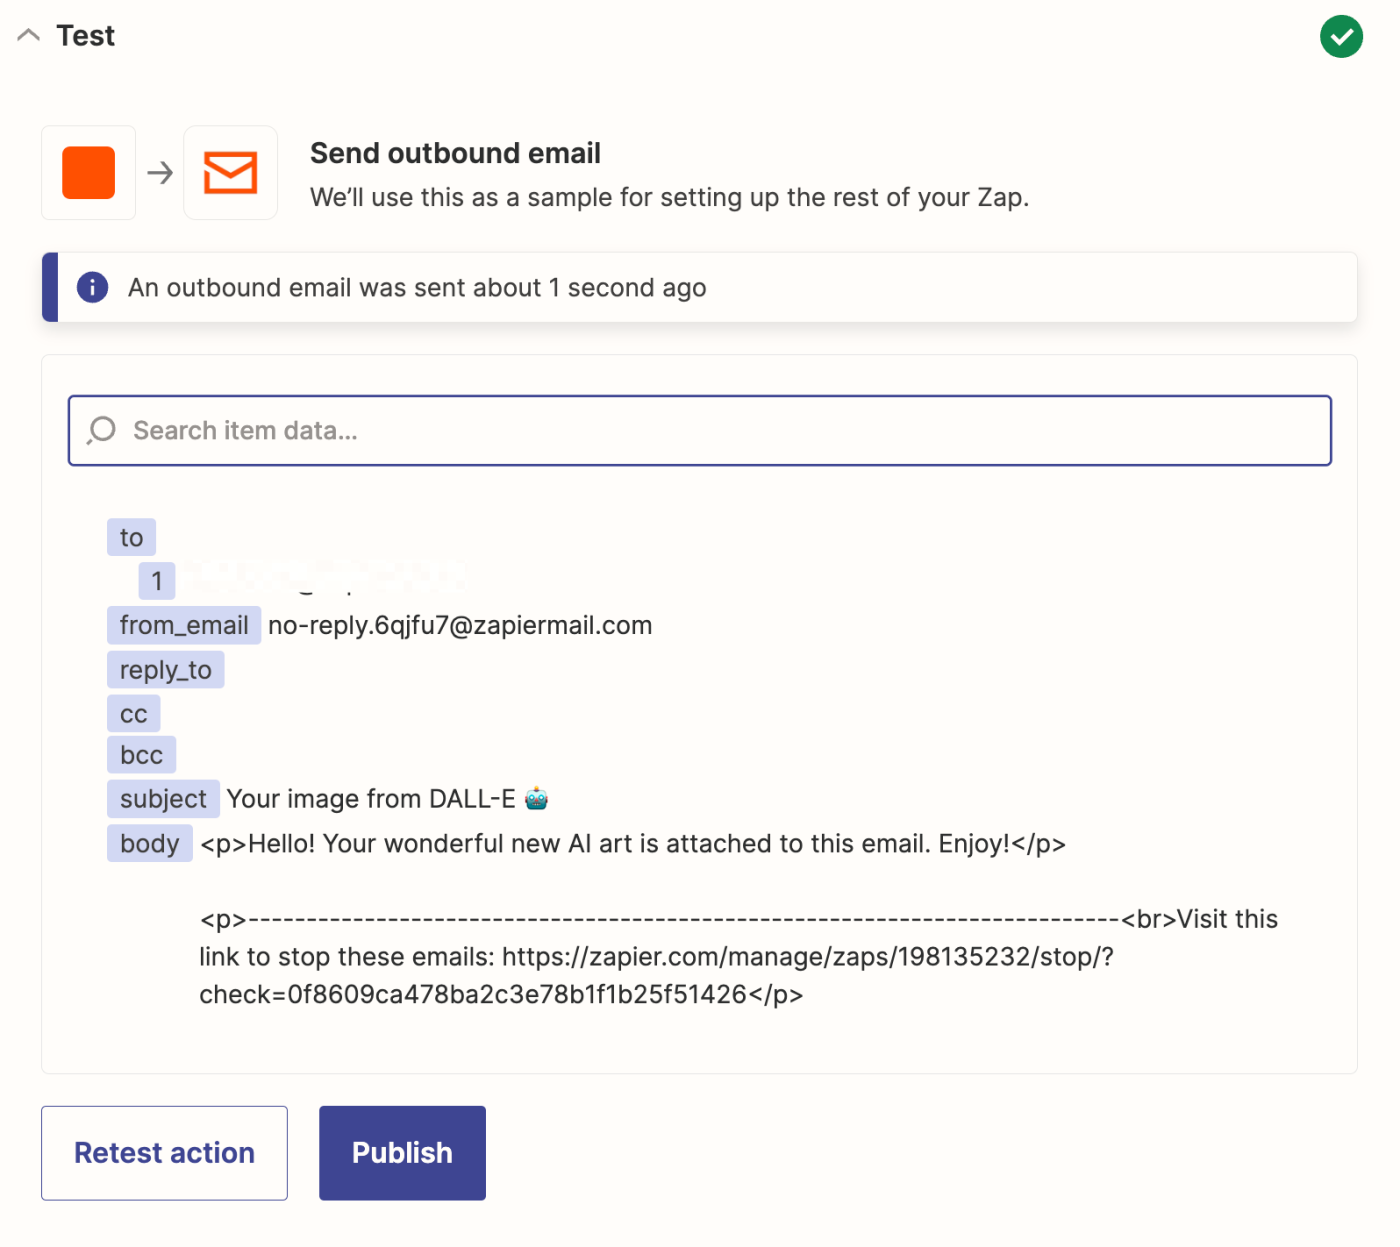 A screenshot of a successful Email by Zapier action step test in the Zapier editor.